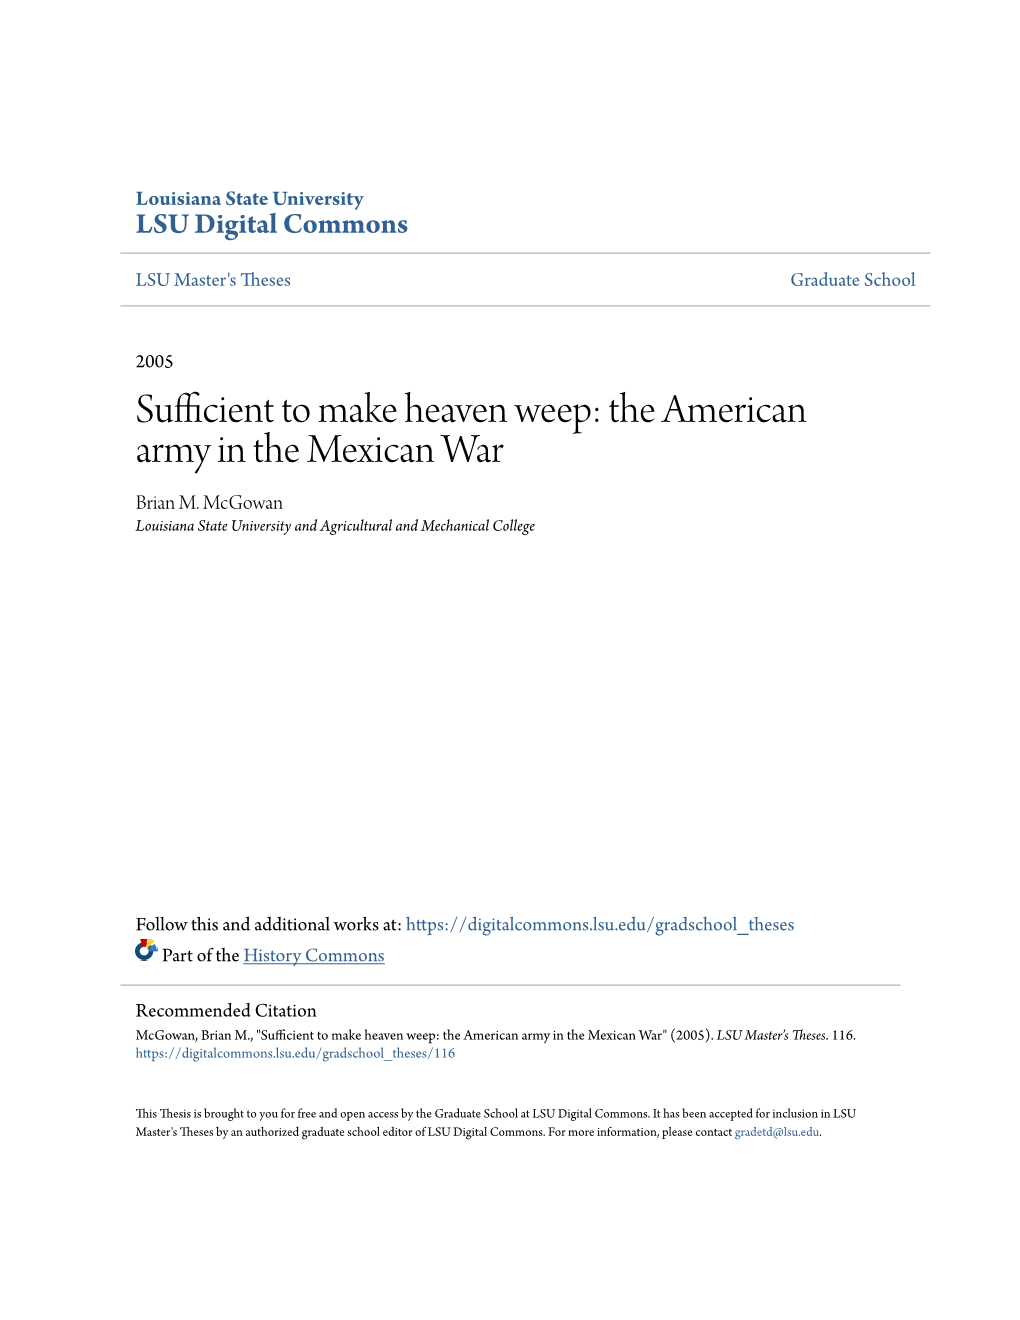 Sufficient to Make Heaven Weep: the American Army in the Mexican War Brian M